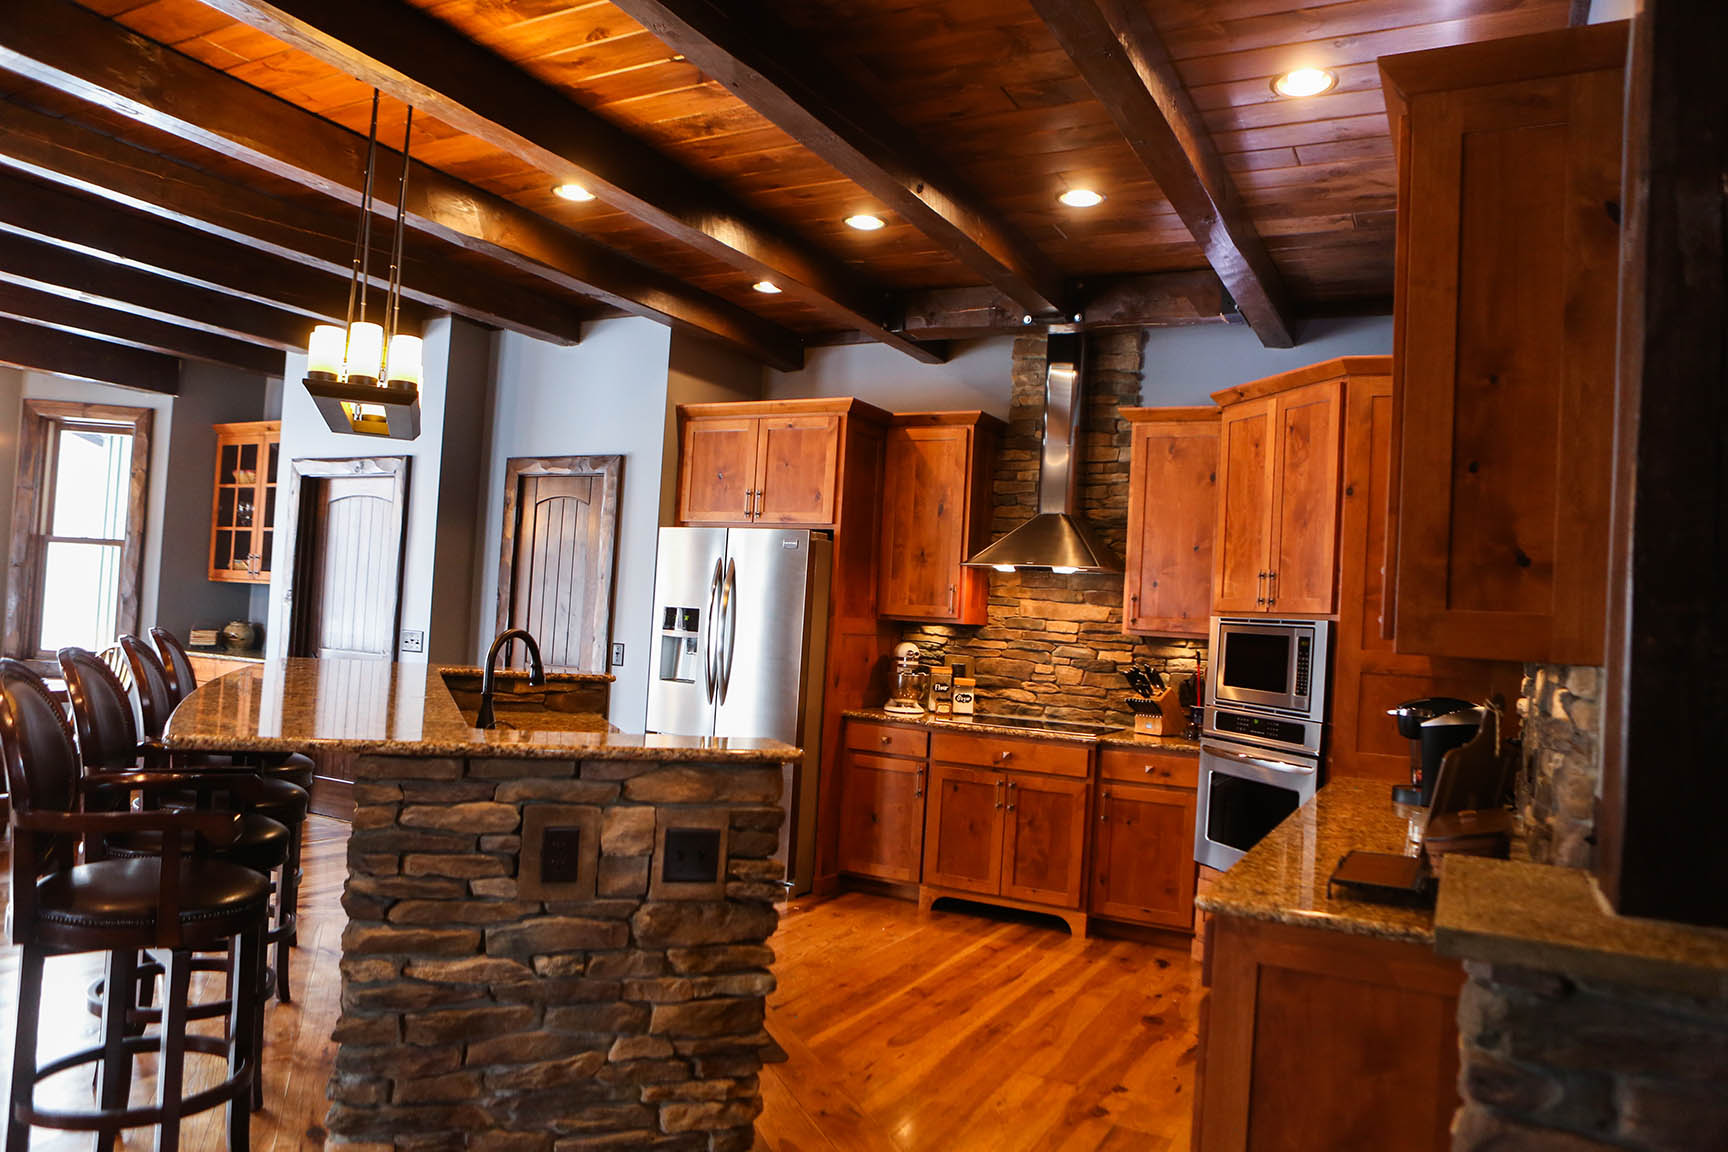 In today’s rustic kitchens hewed trims, stone, and timbers help create a warm feeling. With our different accents we can help create your modern rustic design.